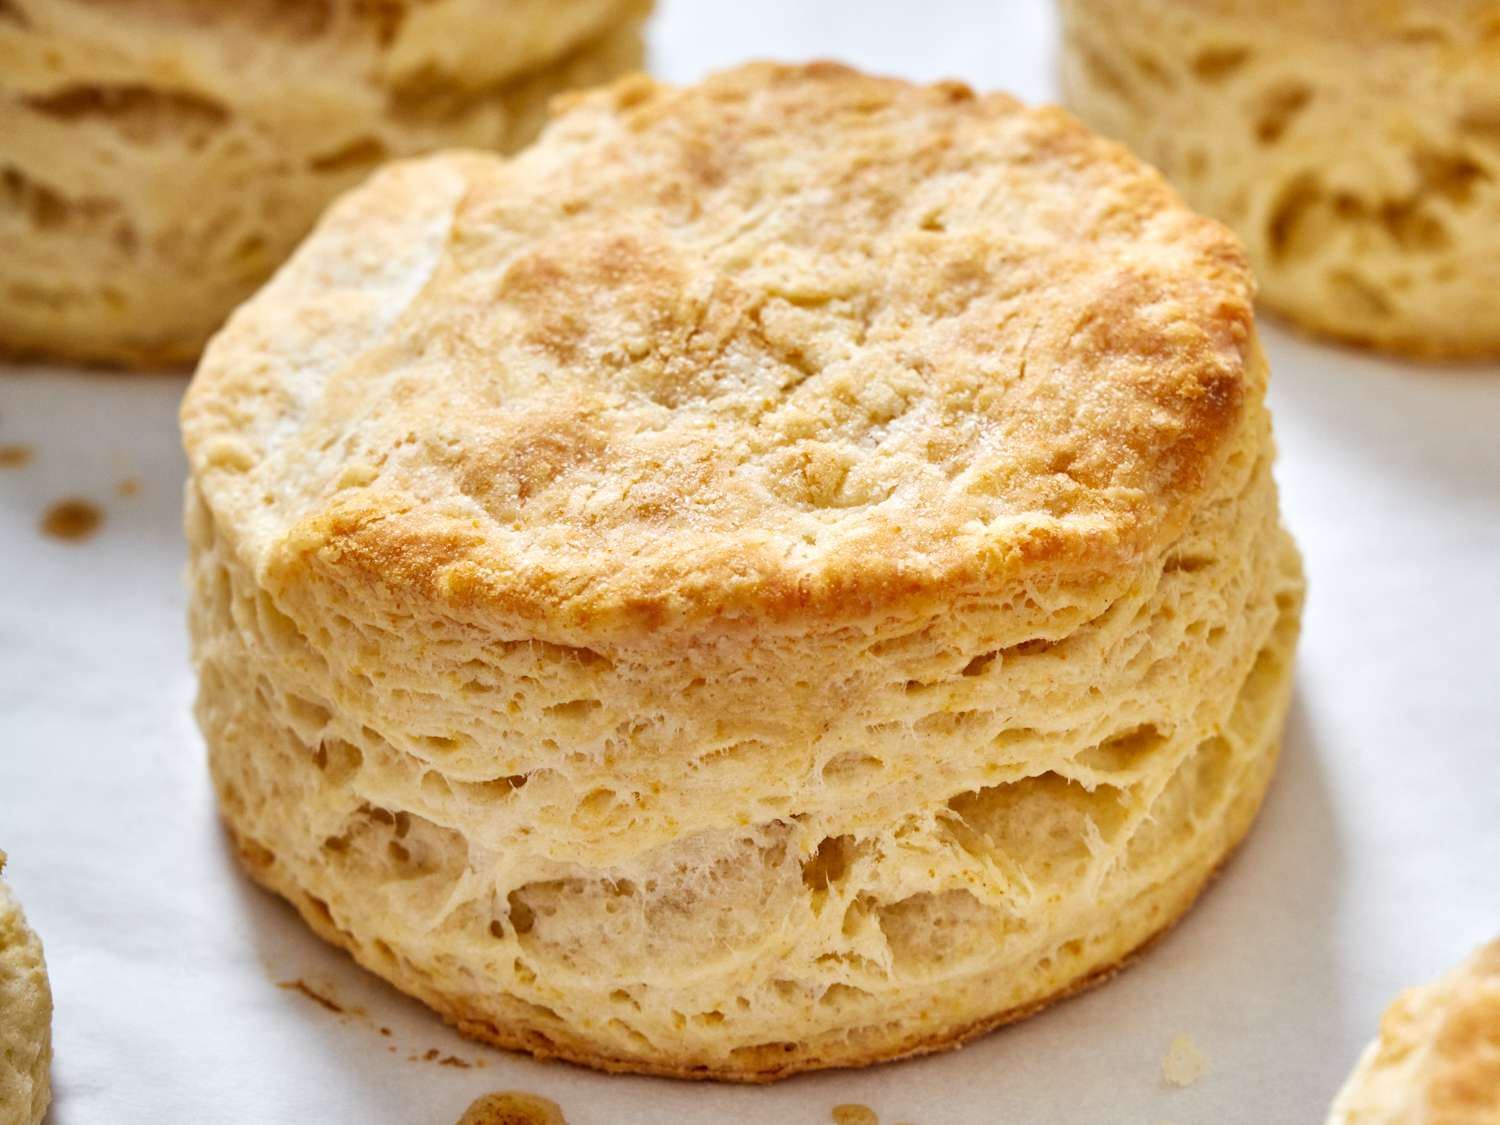 A close up of a baked buttermilk biscuit.